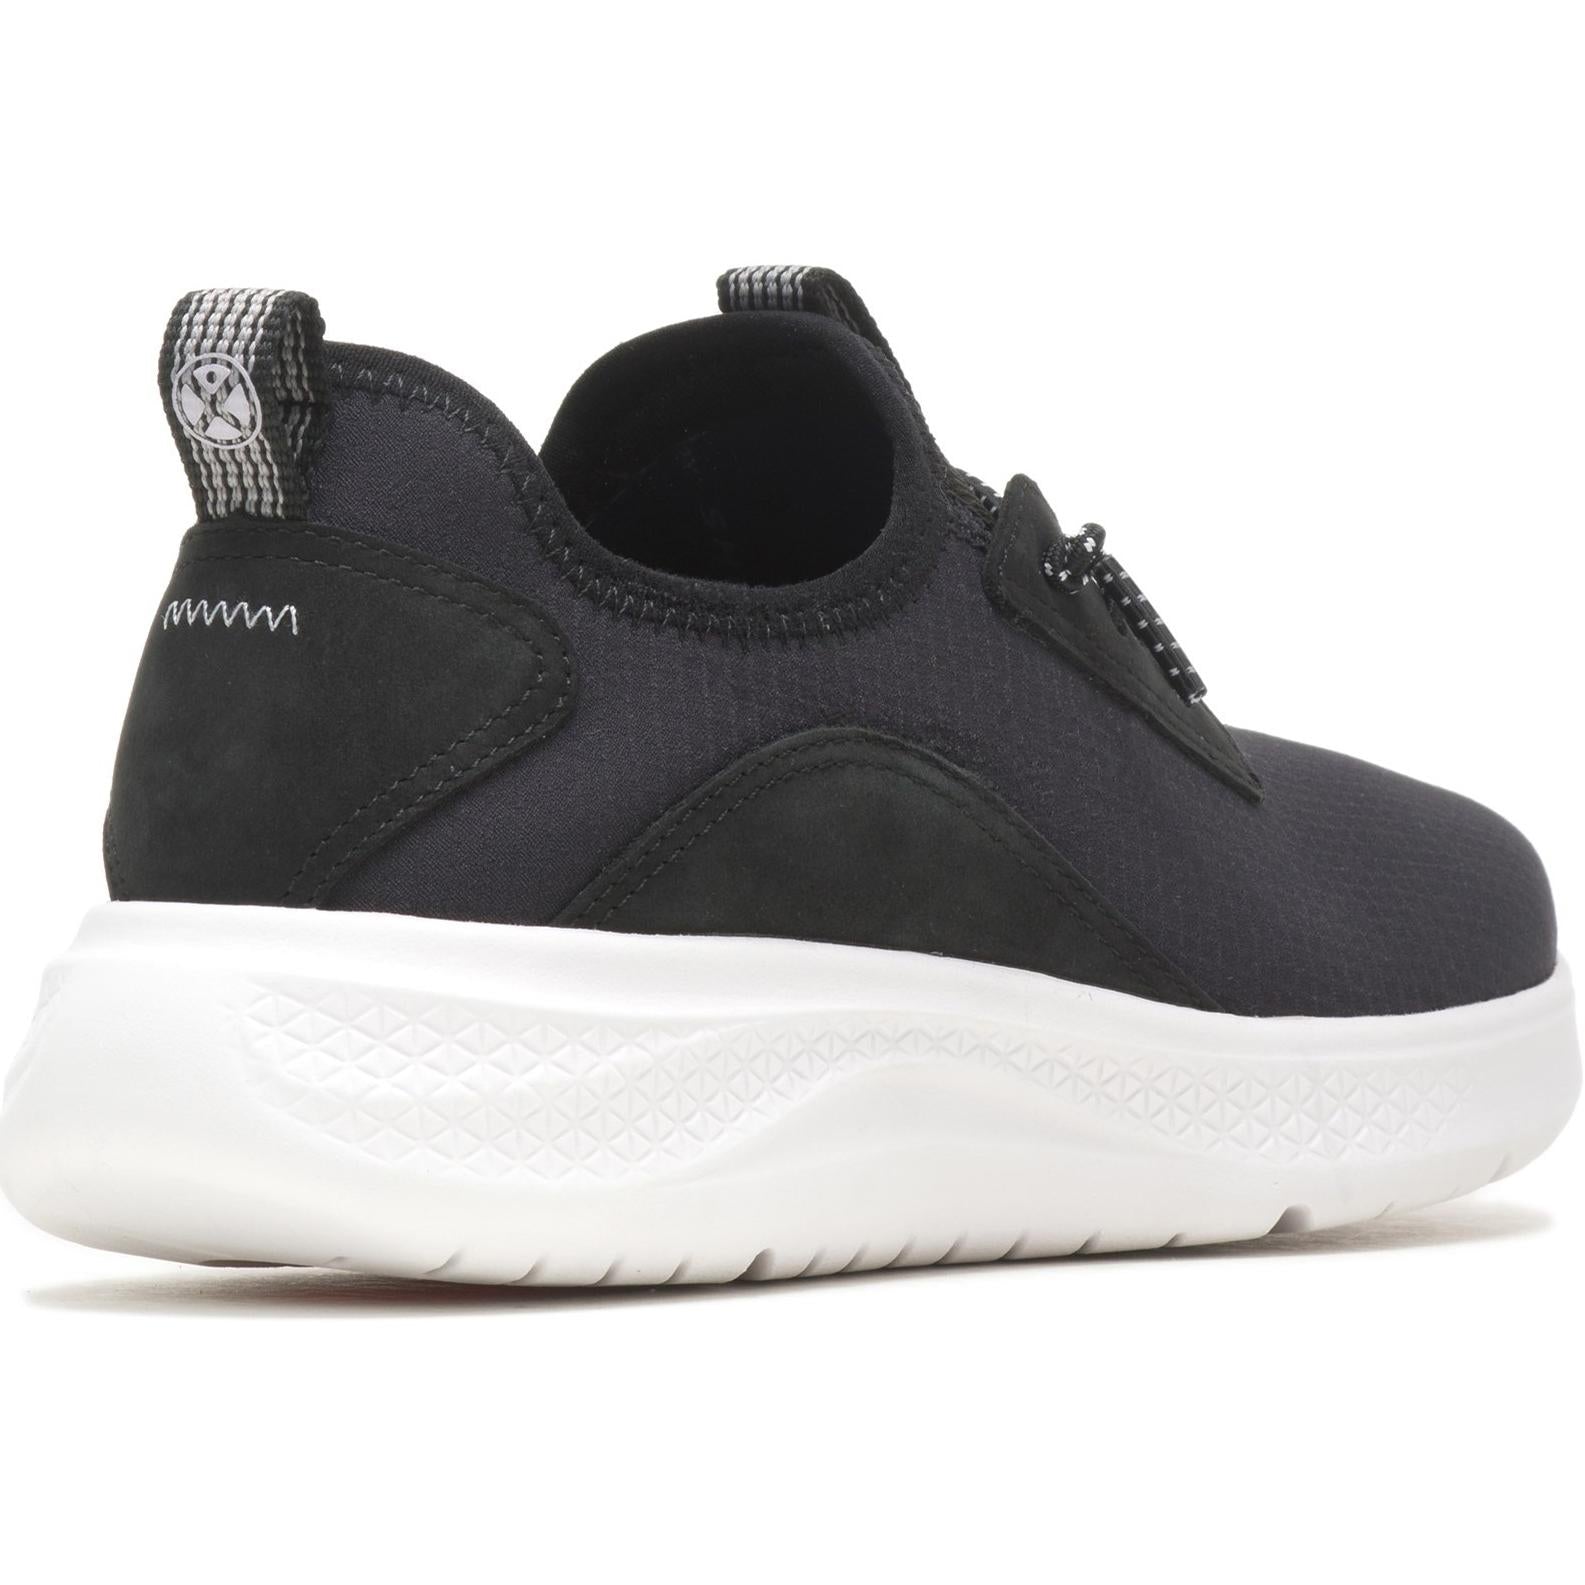 Hush Puppies Elevate Bungee Trainers